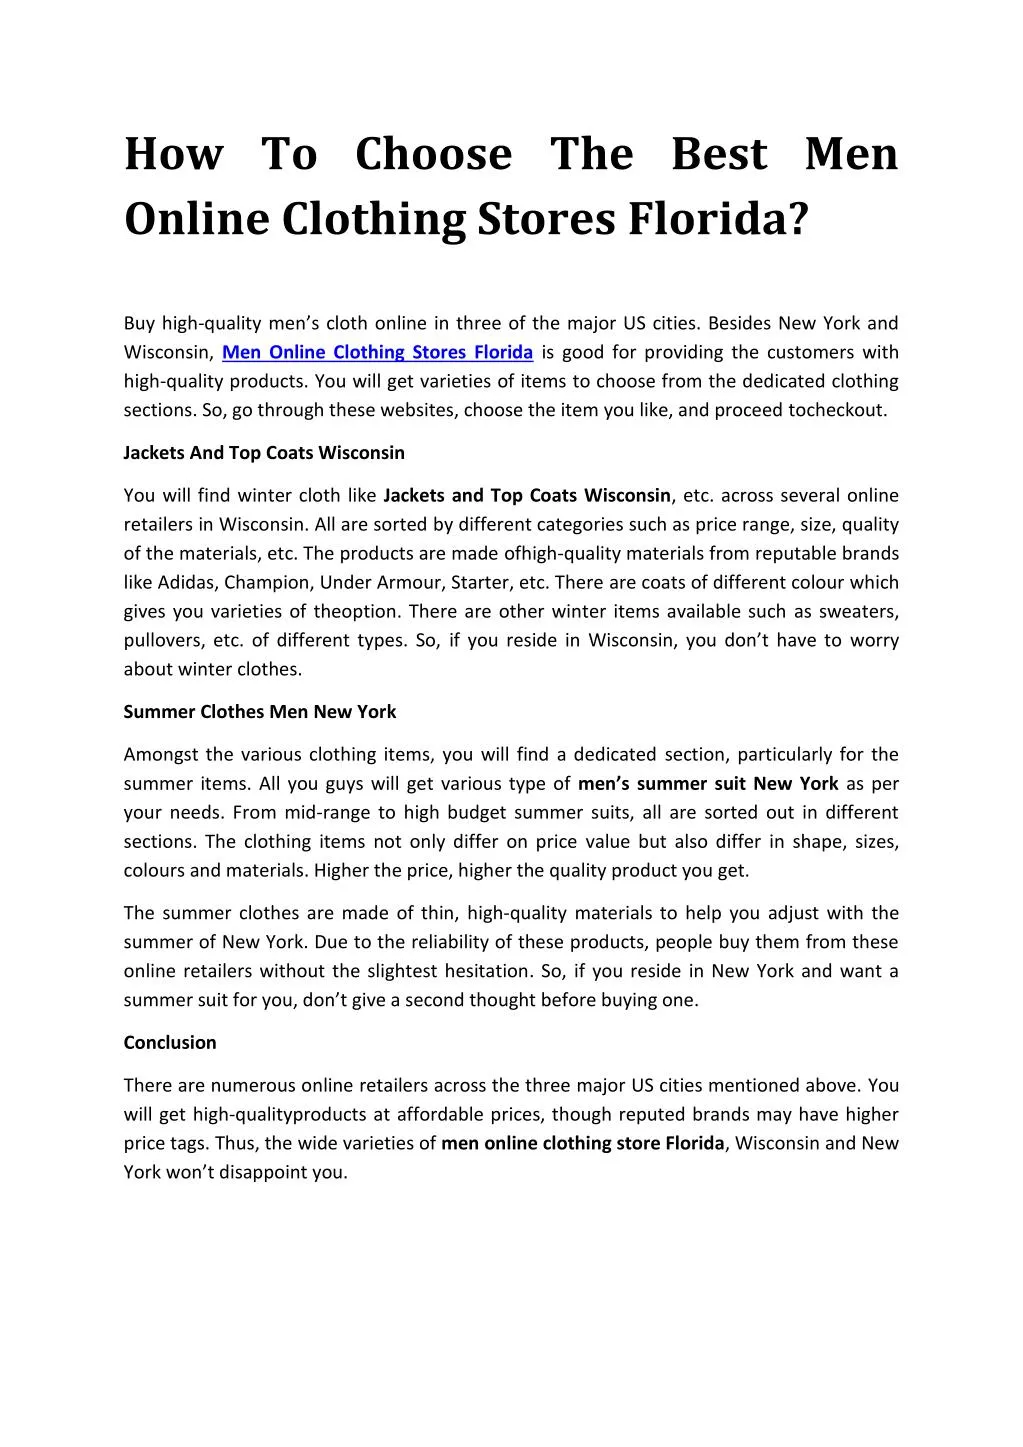 how to choose the best men online clothing stores